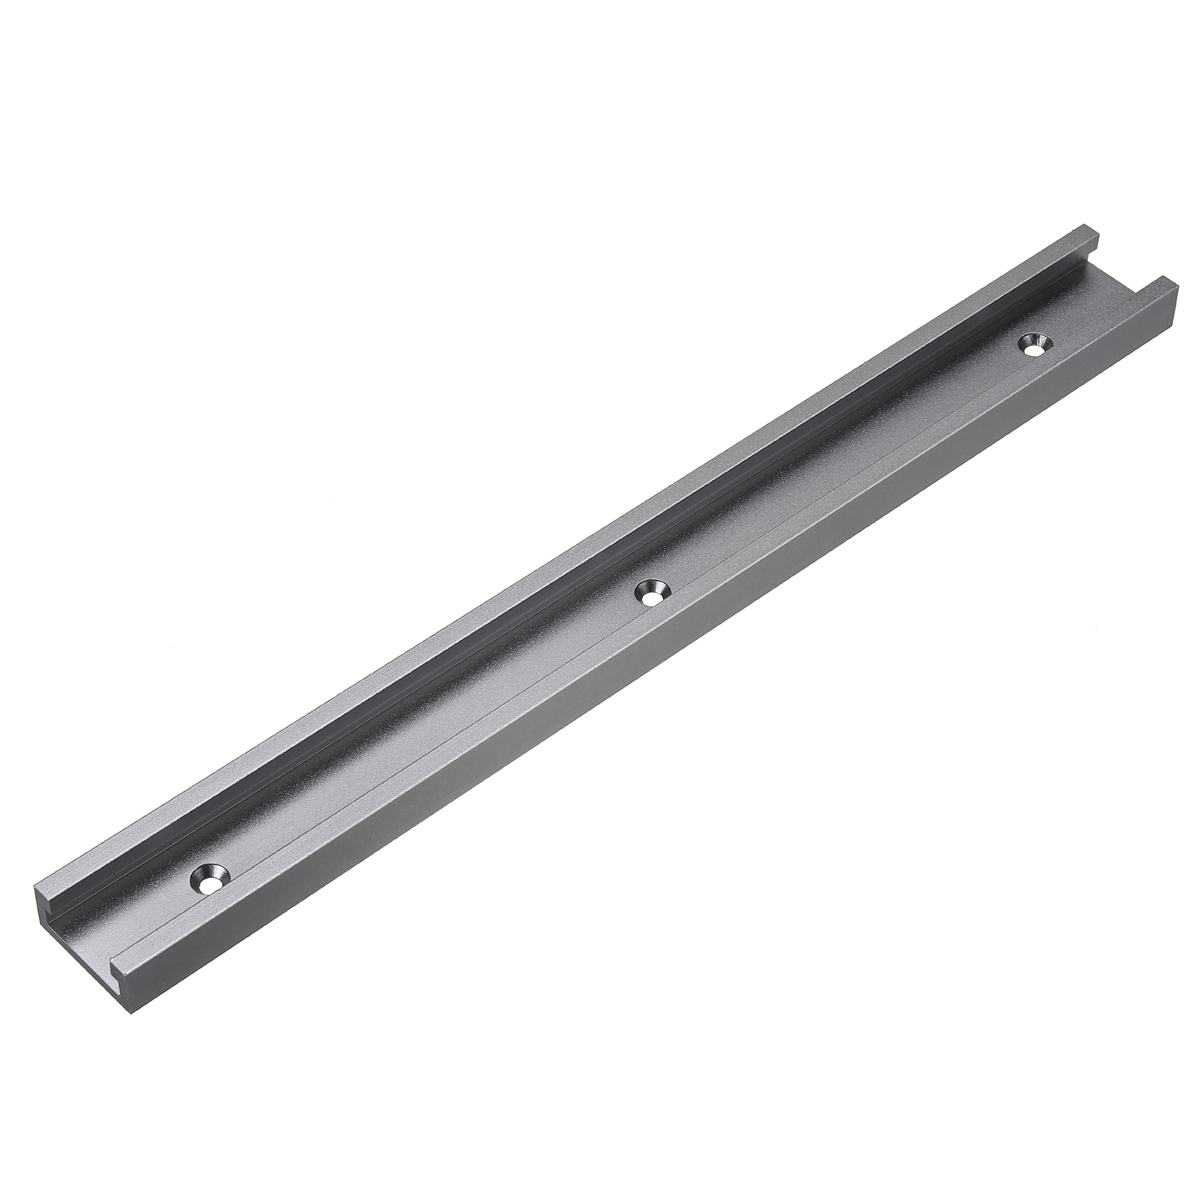 300mm-to-1220mm-Grey-T-Track-with-Predrilled-Mounting-Holes-30mm-x-128mm-Miter-Slot-for-Saw-Router-T-1810952-2